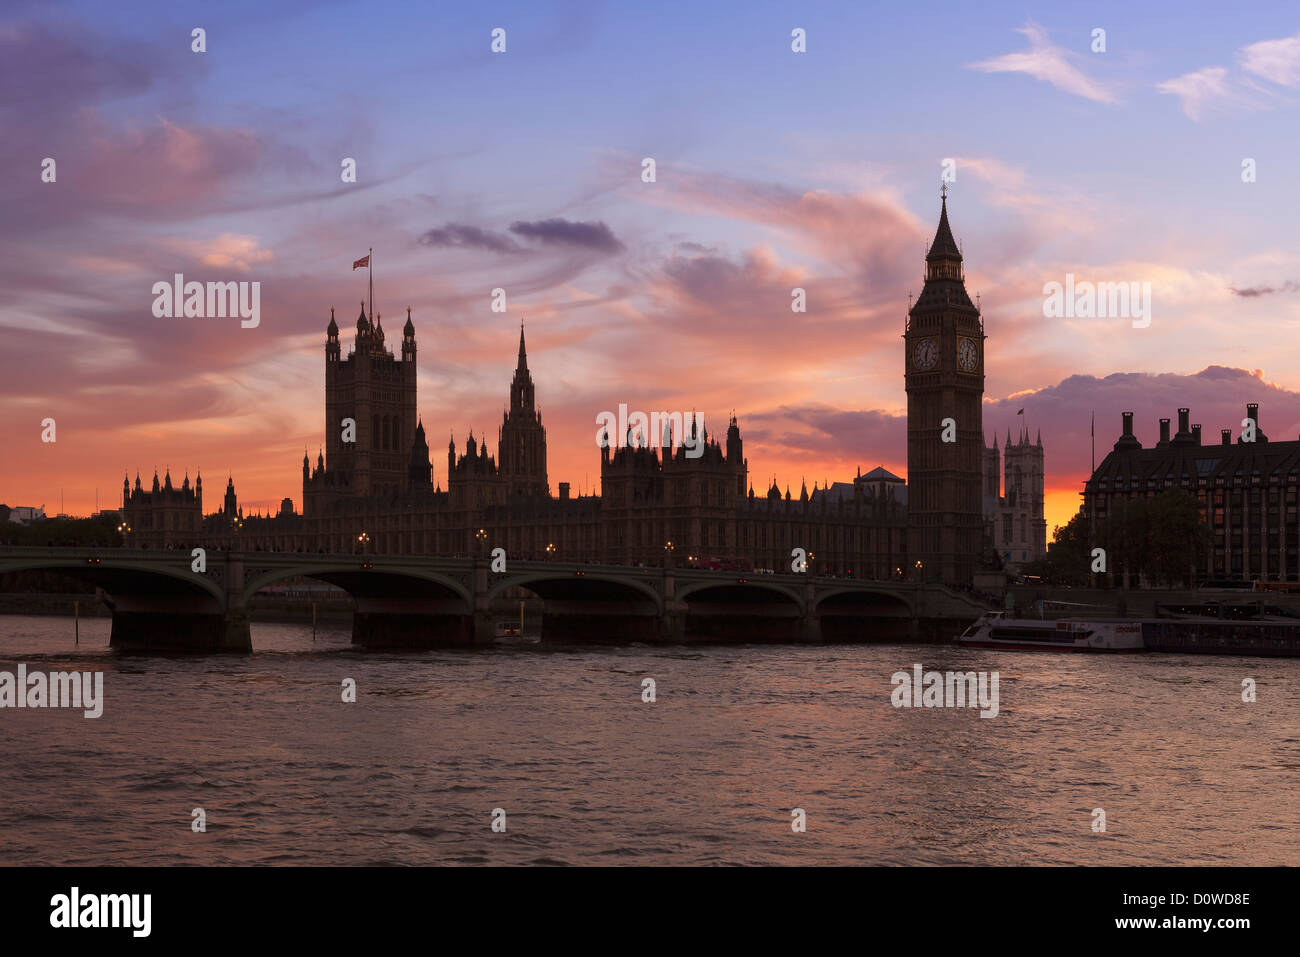 The houses of parliament and westminster bridge silhouetted at dusk, London, UK Stock Photo